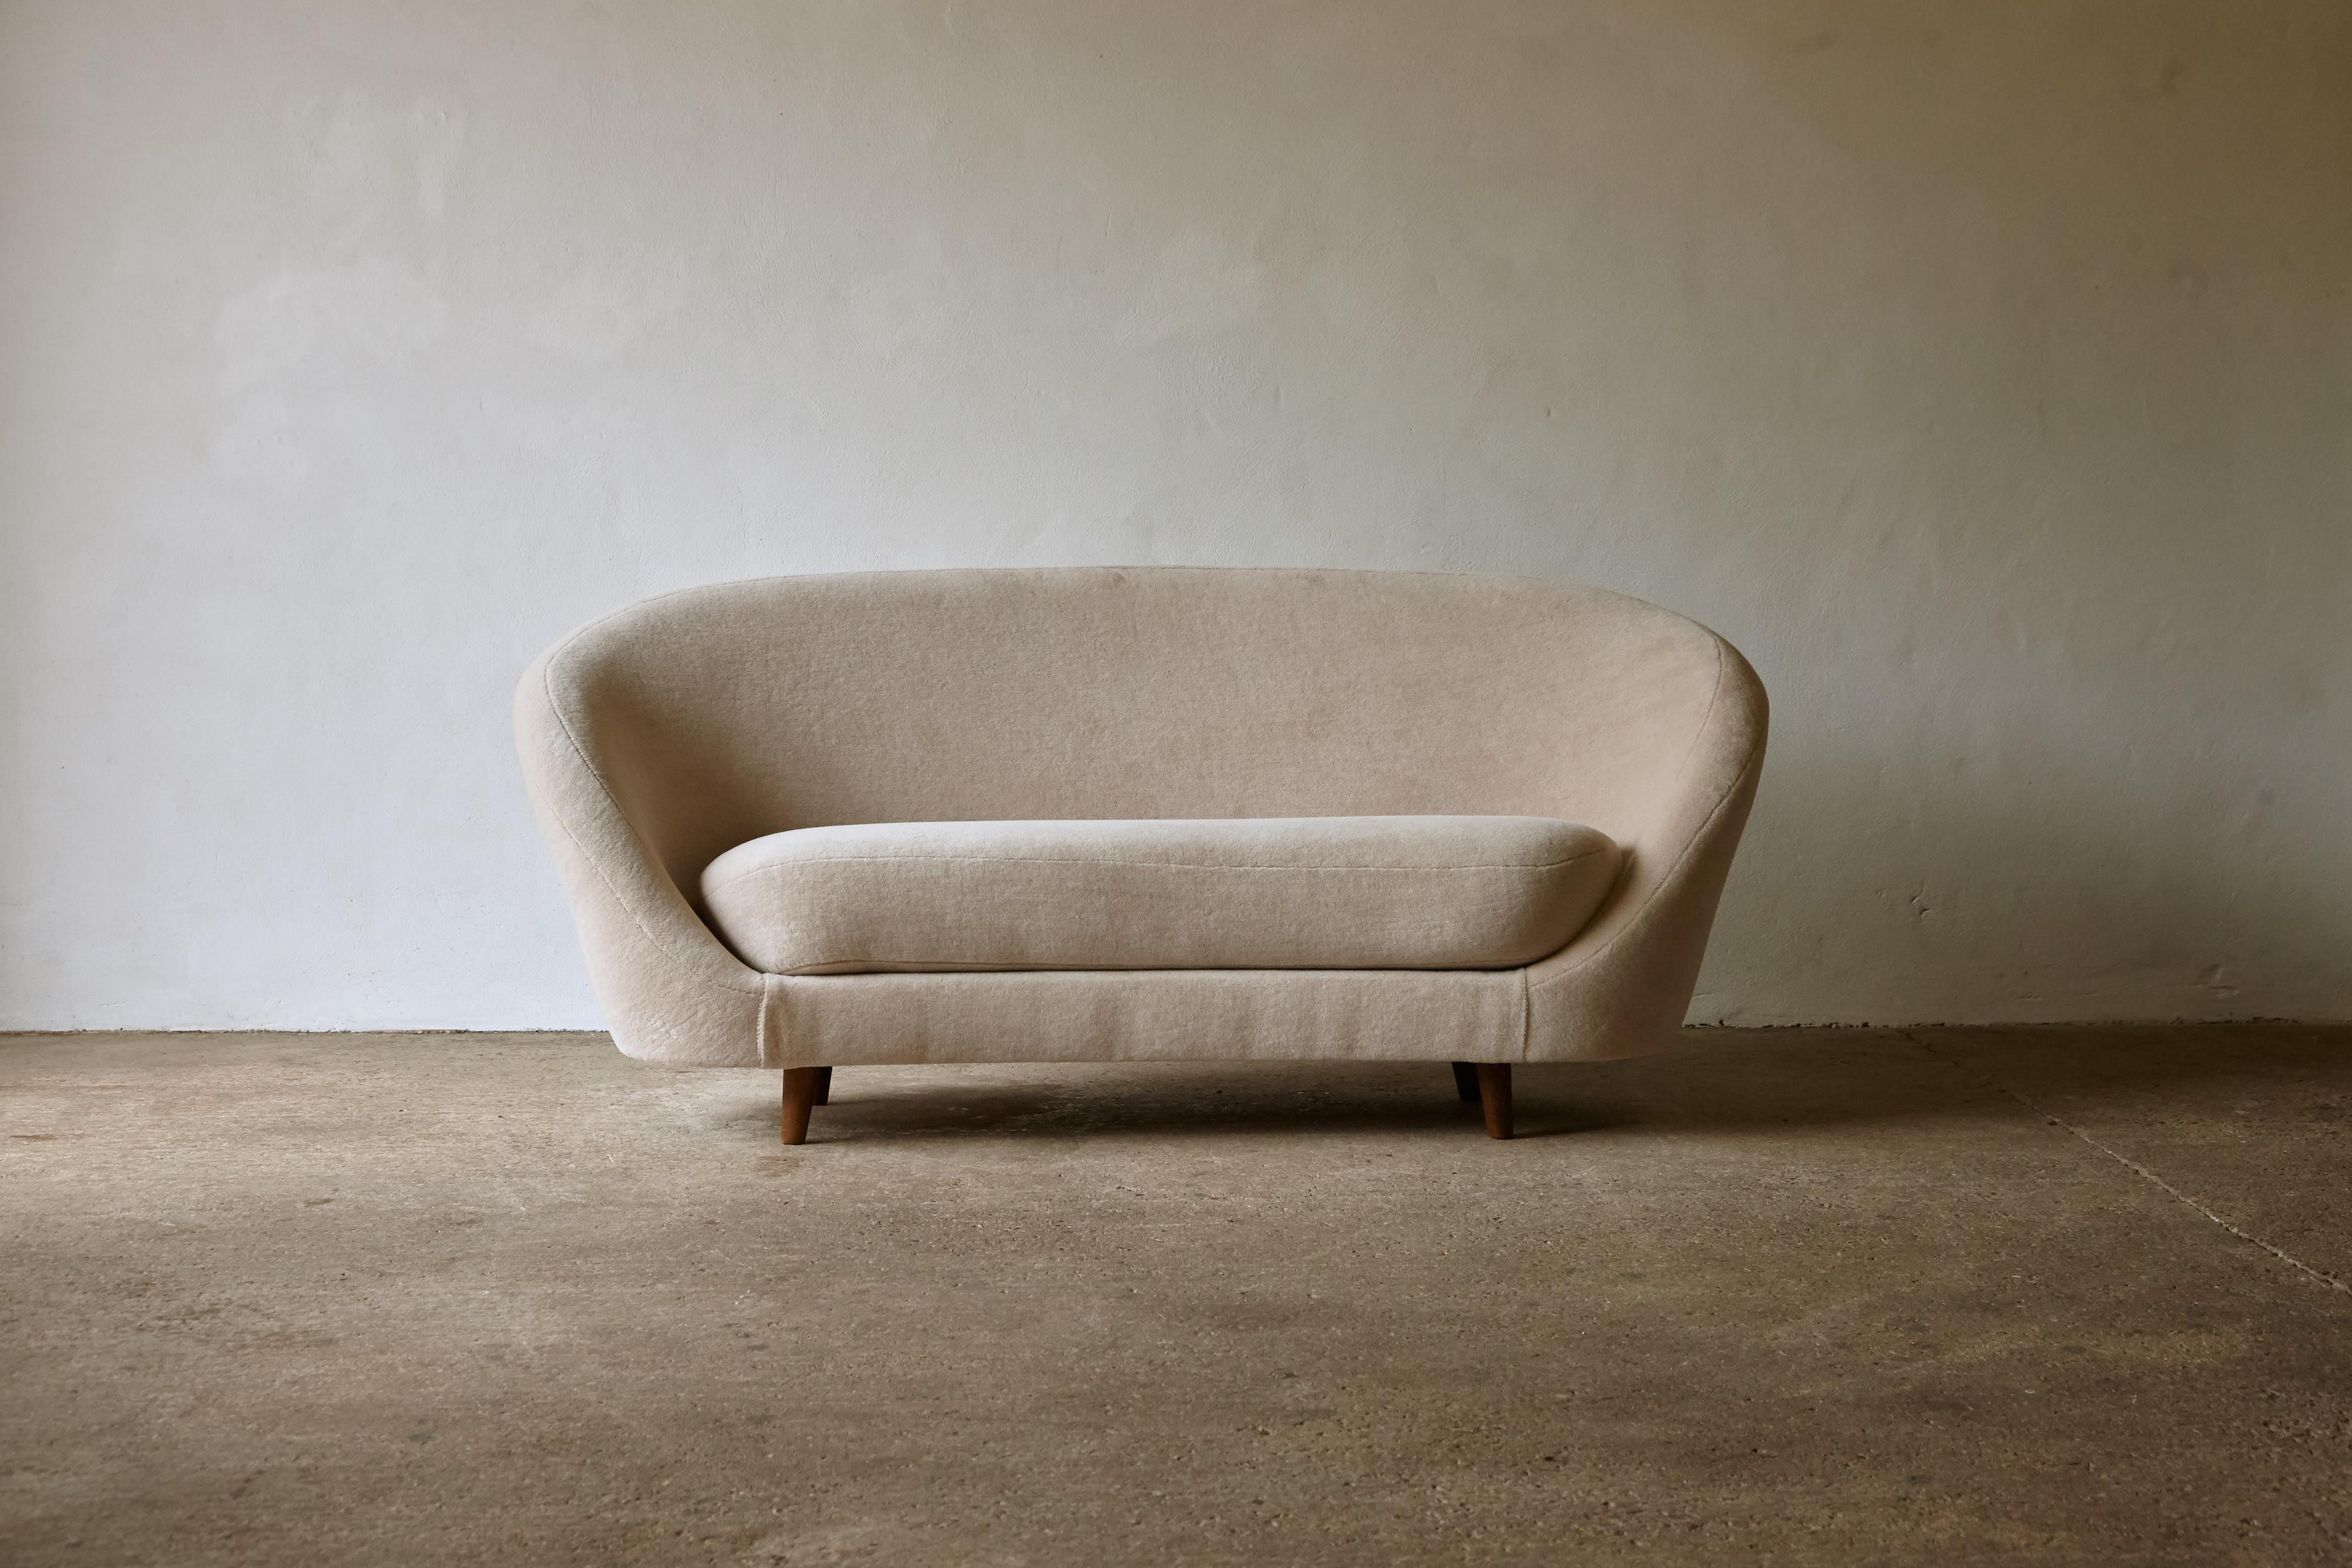 A superb and unusual Italian 1950s/1960s egg shaped sofa, in the style of Ico Parisi. The sofa has been reupholstered in an ivory pure alpaca fabric and is of a curved, shallow organic form. Ships worldwide.


